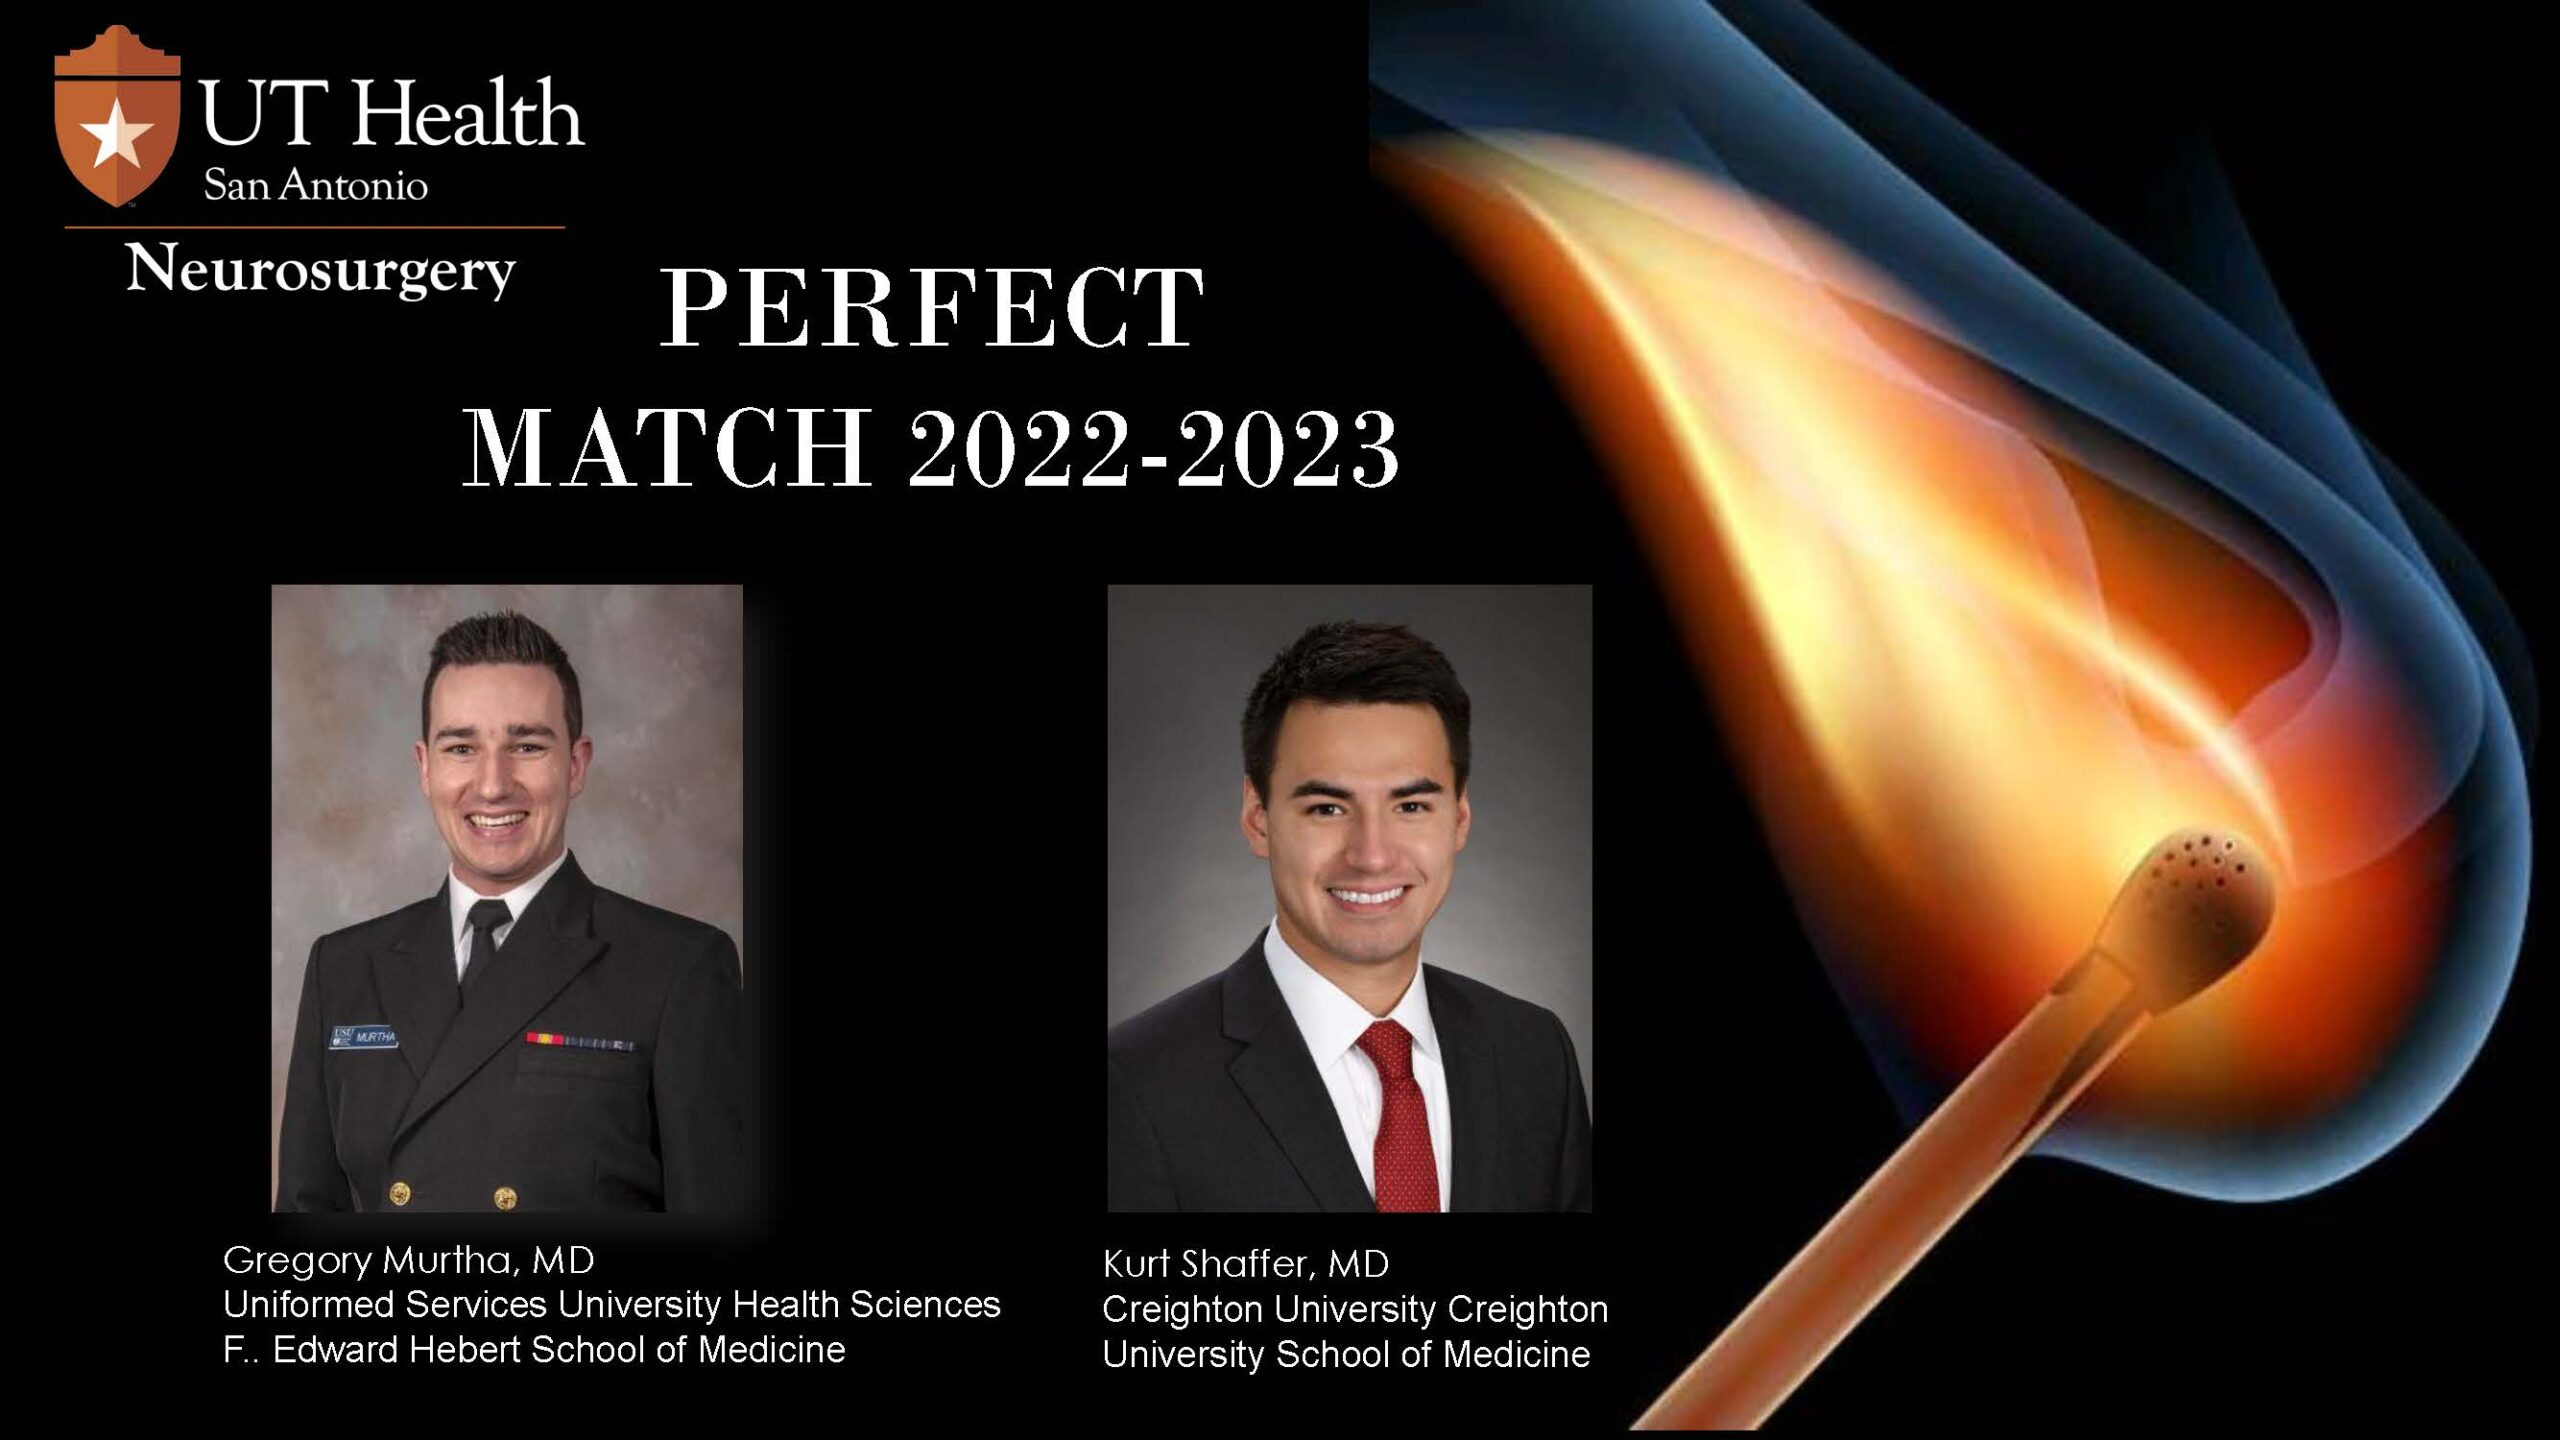 Our 2022-2023 Match Results - Neurosurgery